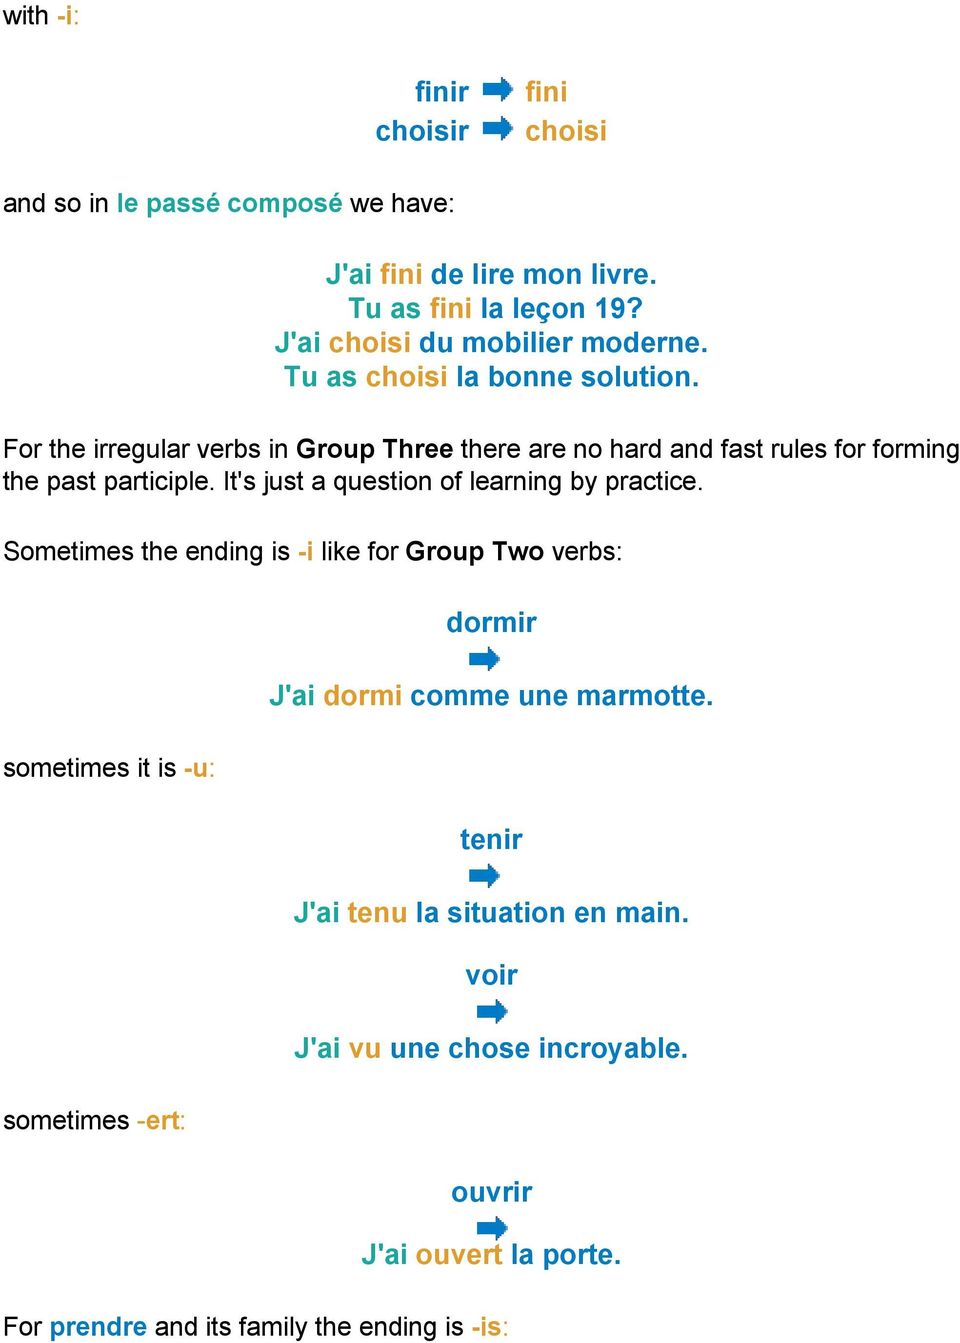 For the irregular verbs in Group Three there are no hard and fast rules for forming the past participle. It's just a question of learning by practice.